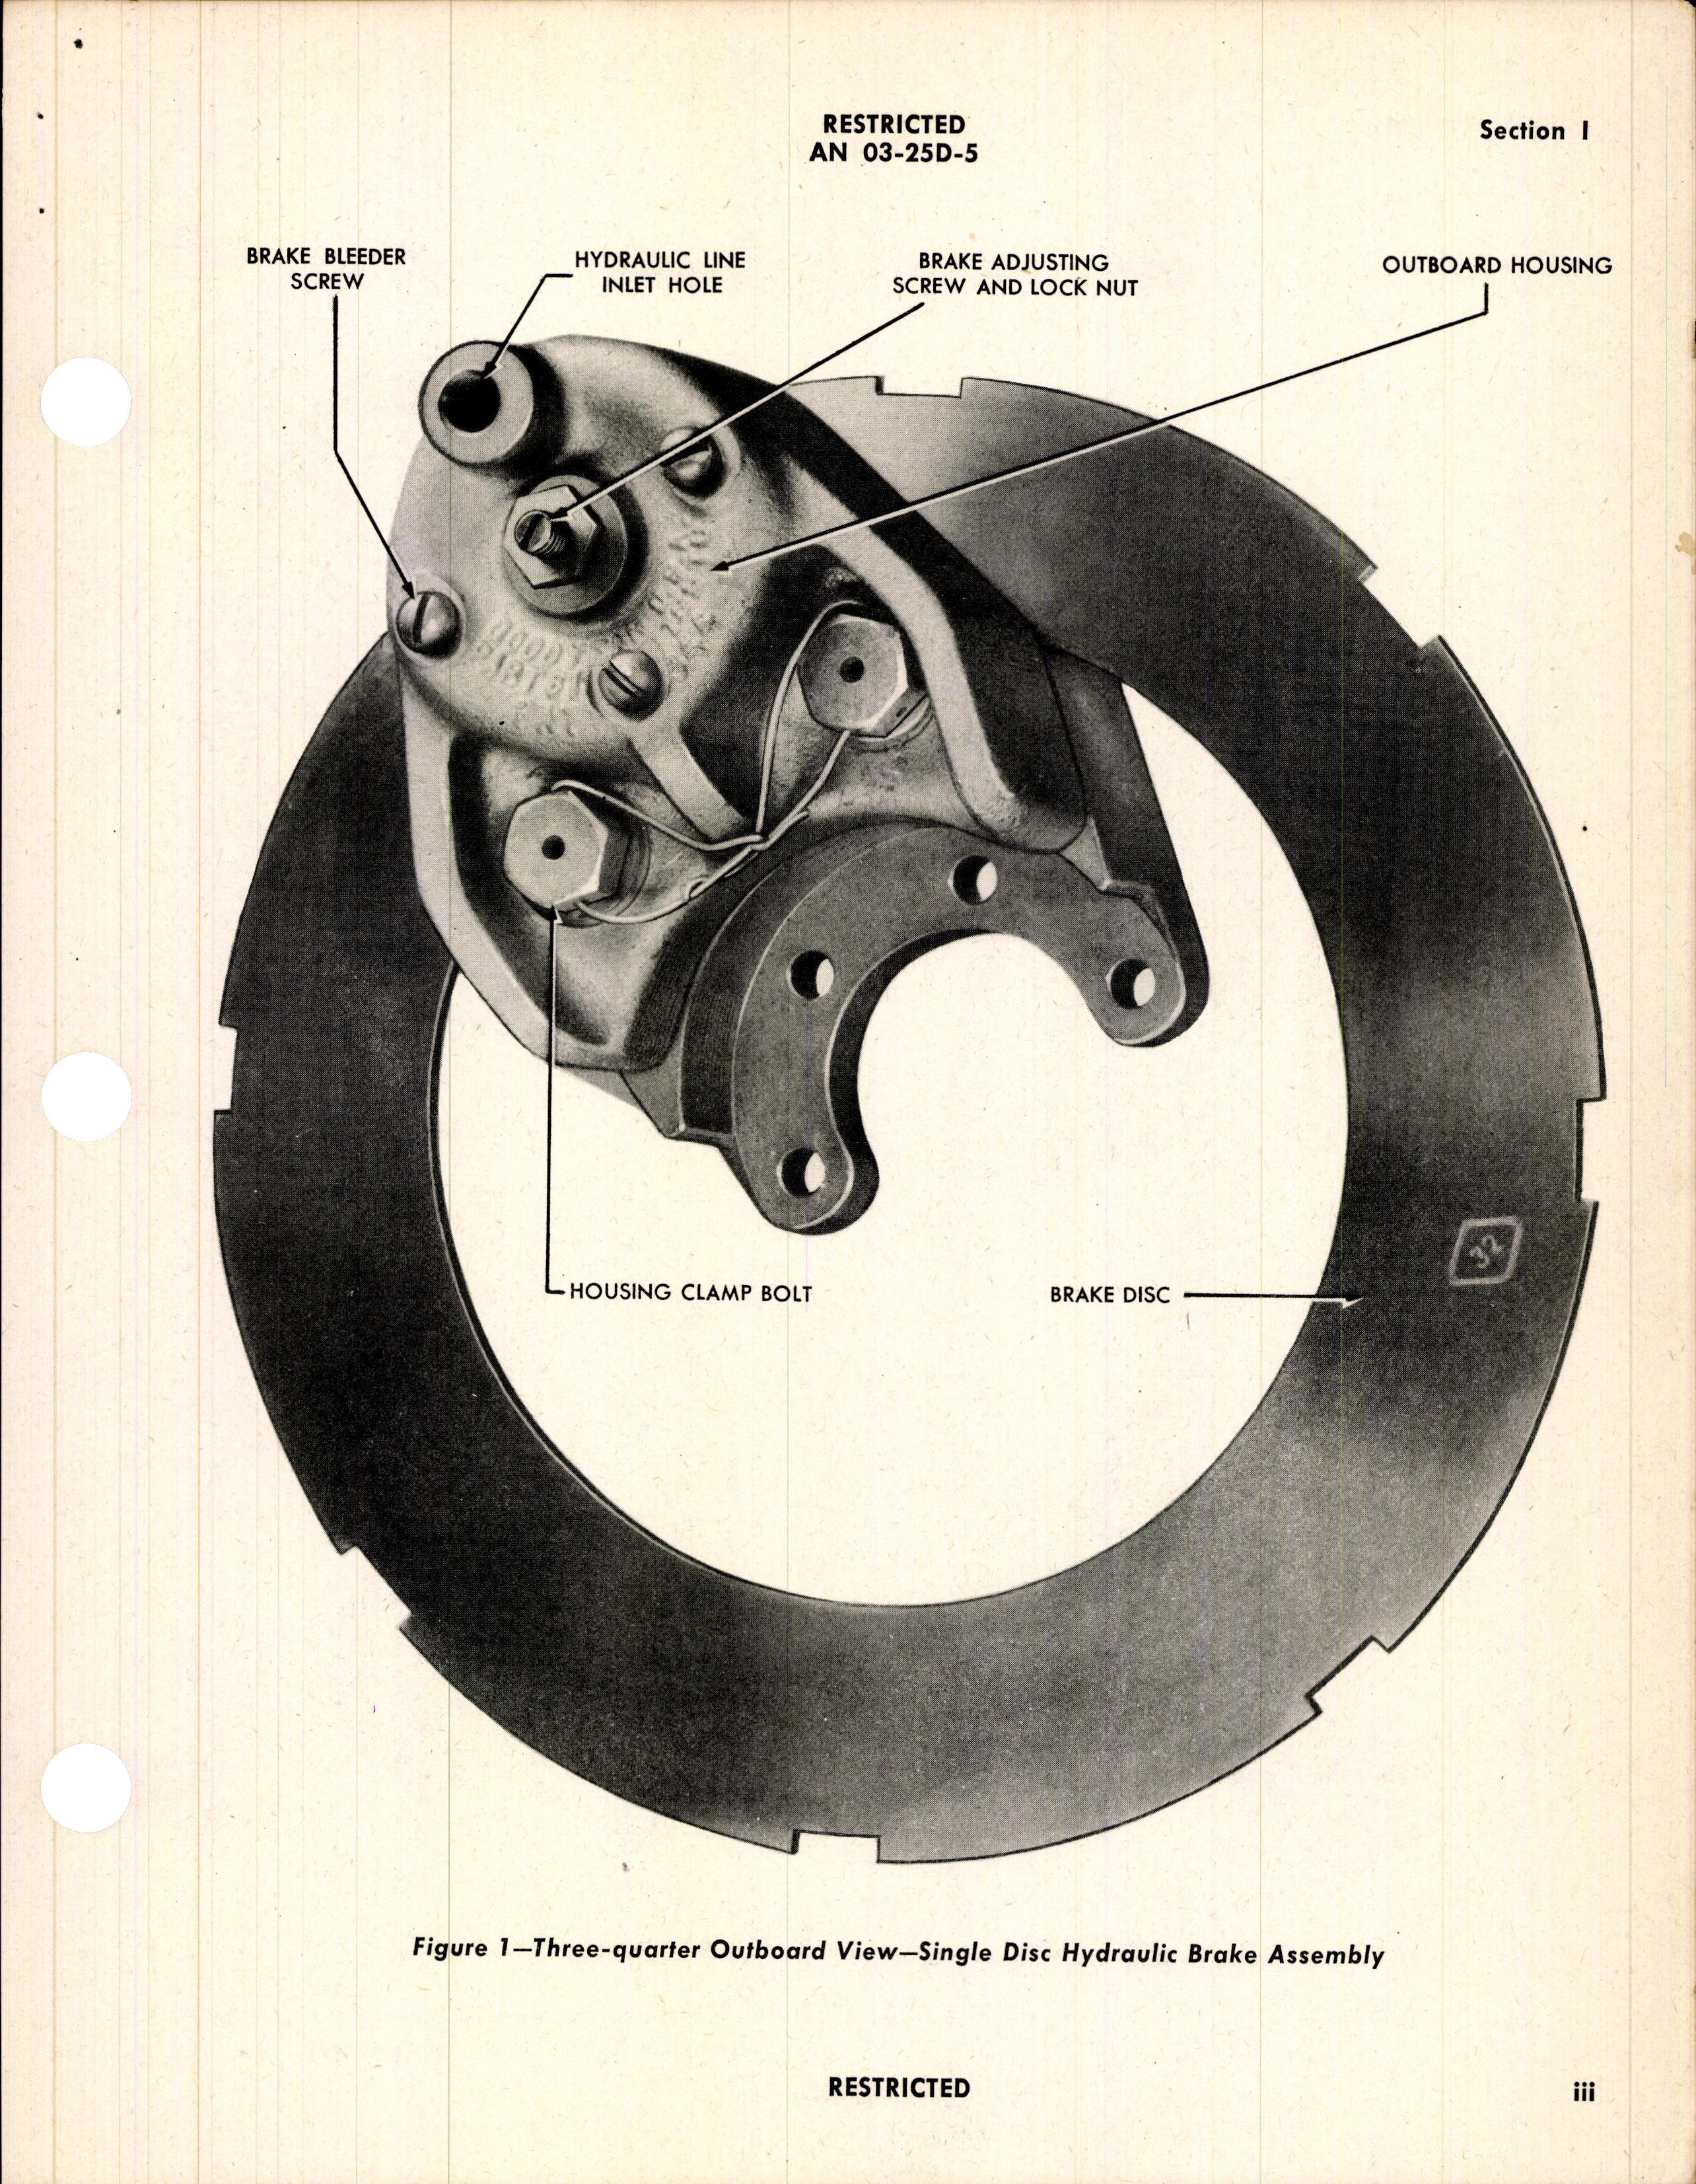 Sample page 5 from AirCorps Library document: Operation, Service, & Overhaul Instructions with Parts Catalog for Goodyear Single Disc Brakes